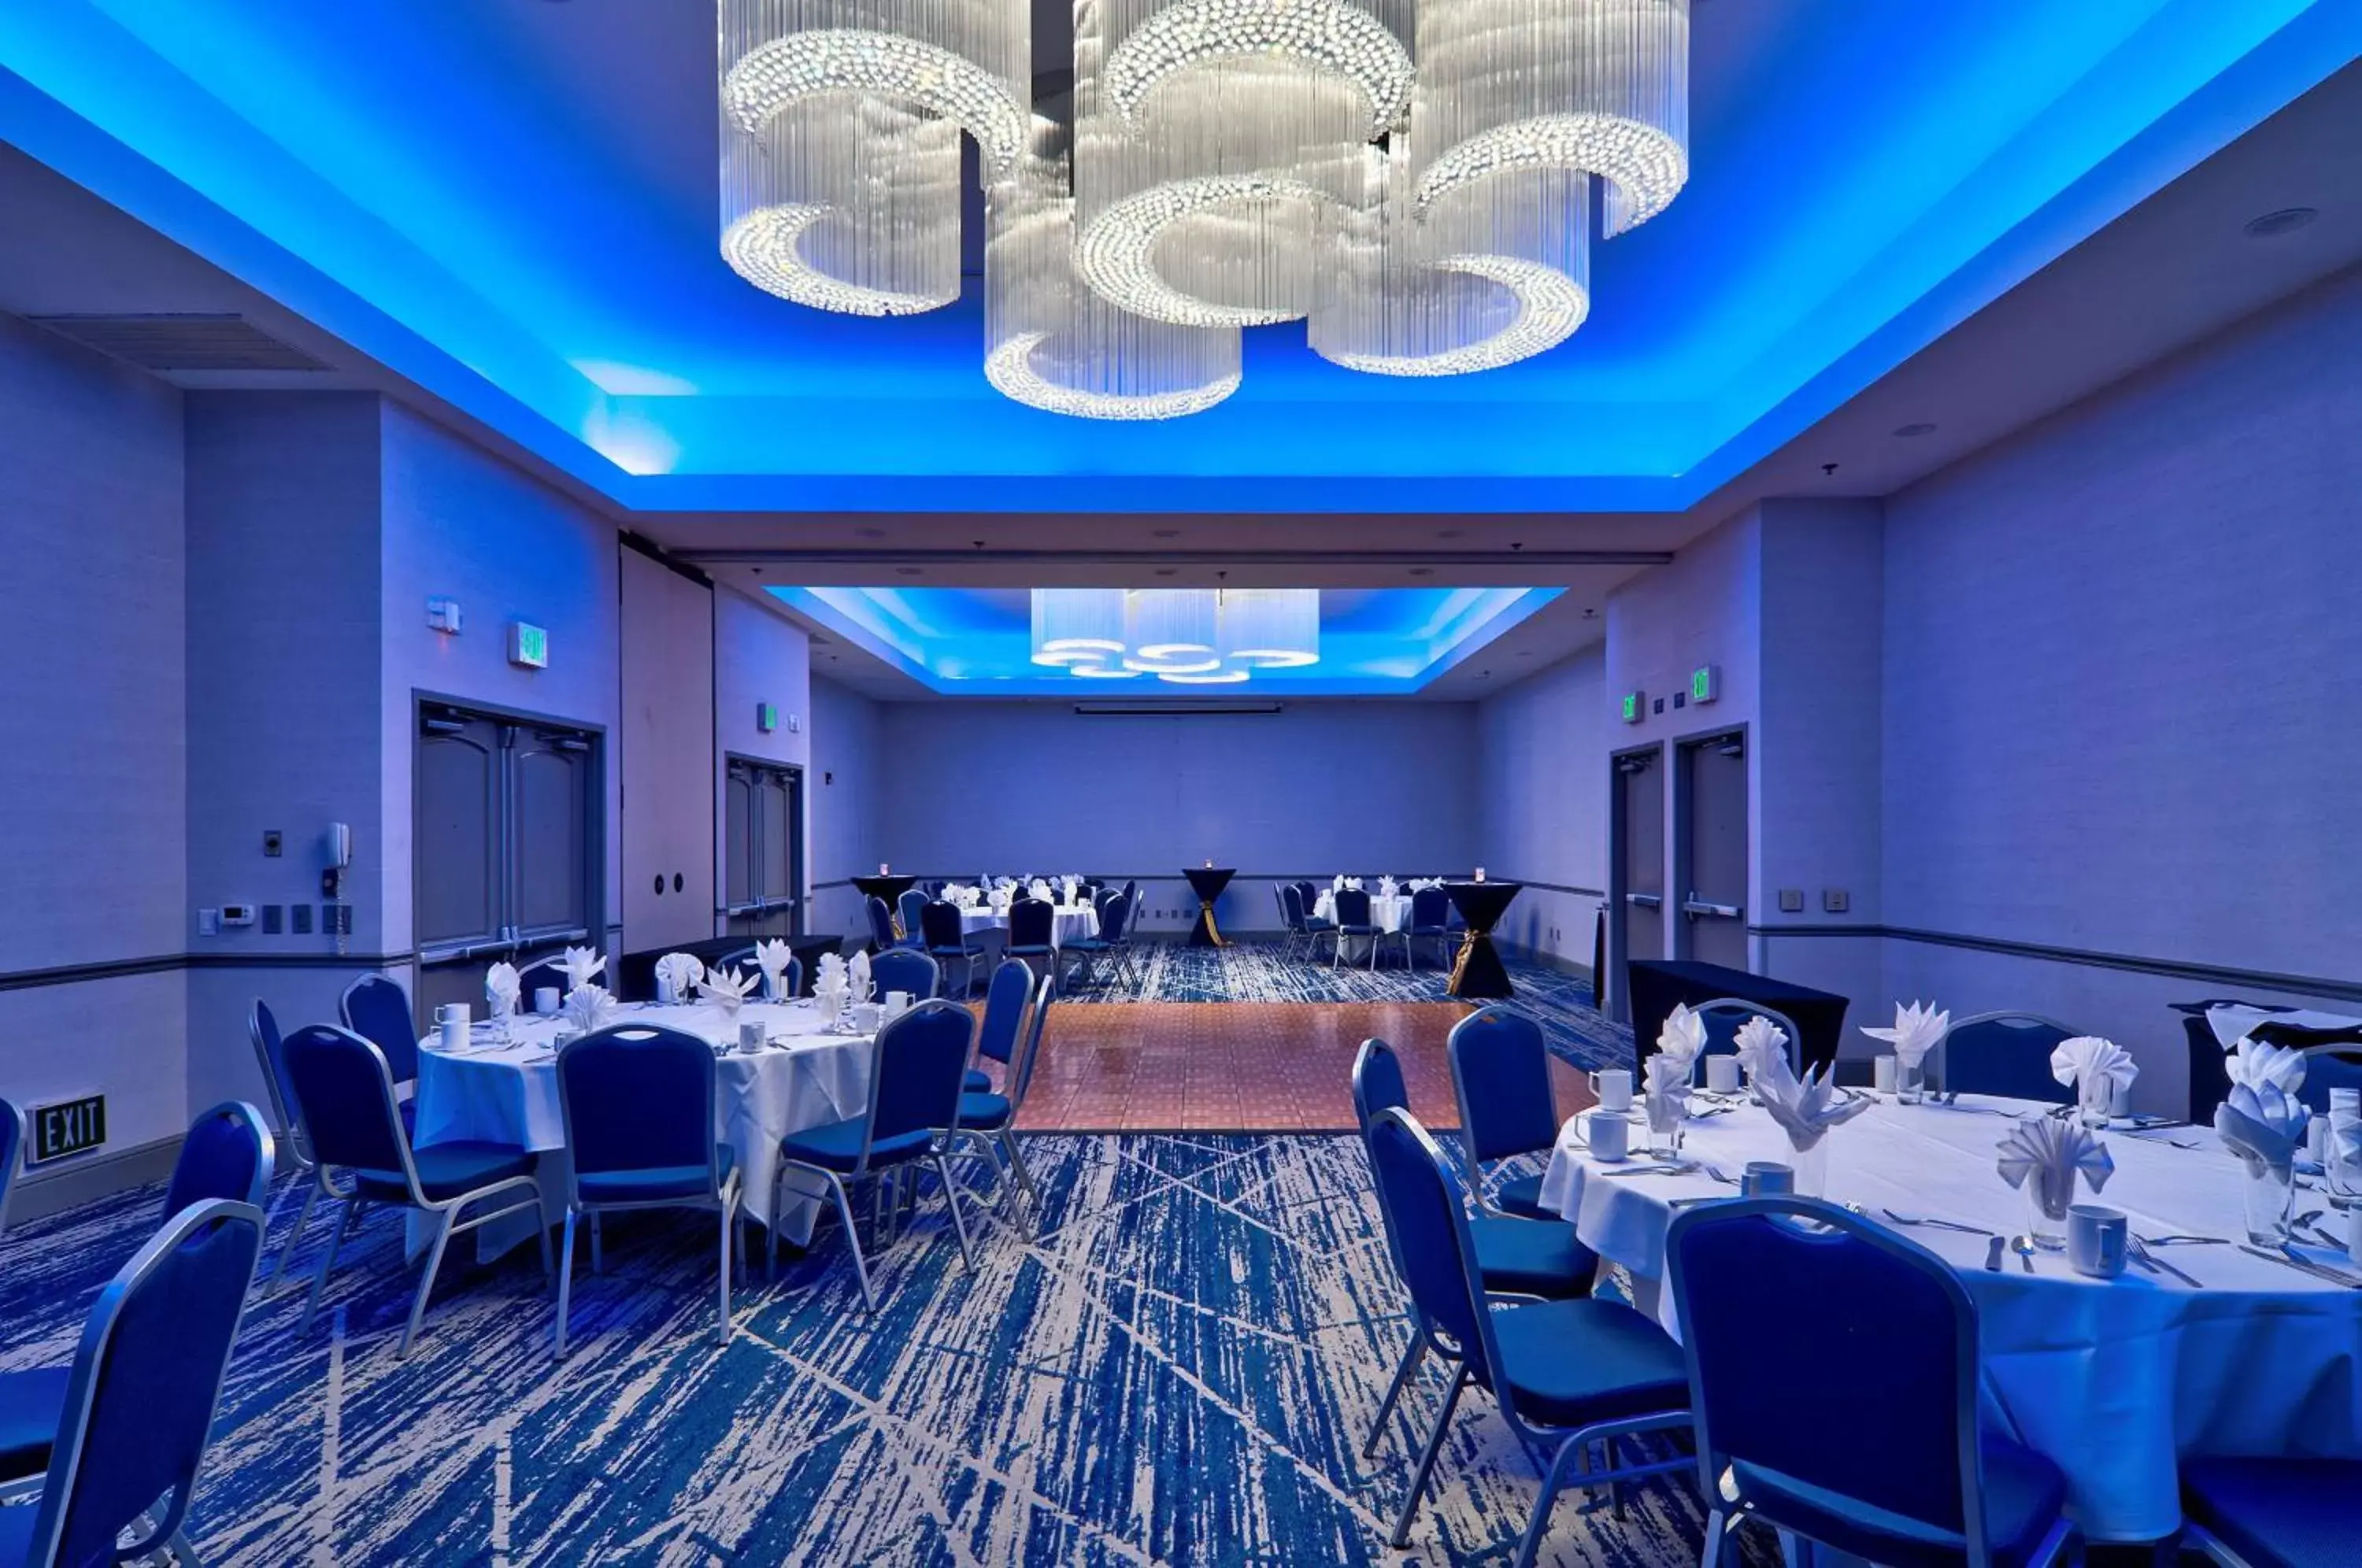 Meeting/conference room, Banquet Facilities in Hilton Garden Inn Livermore